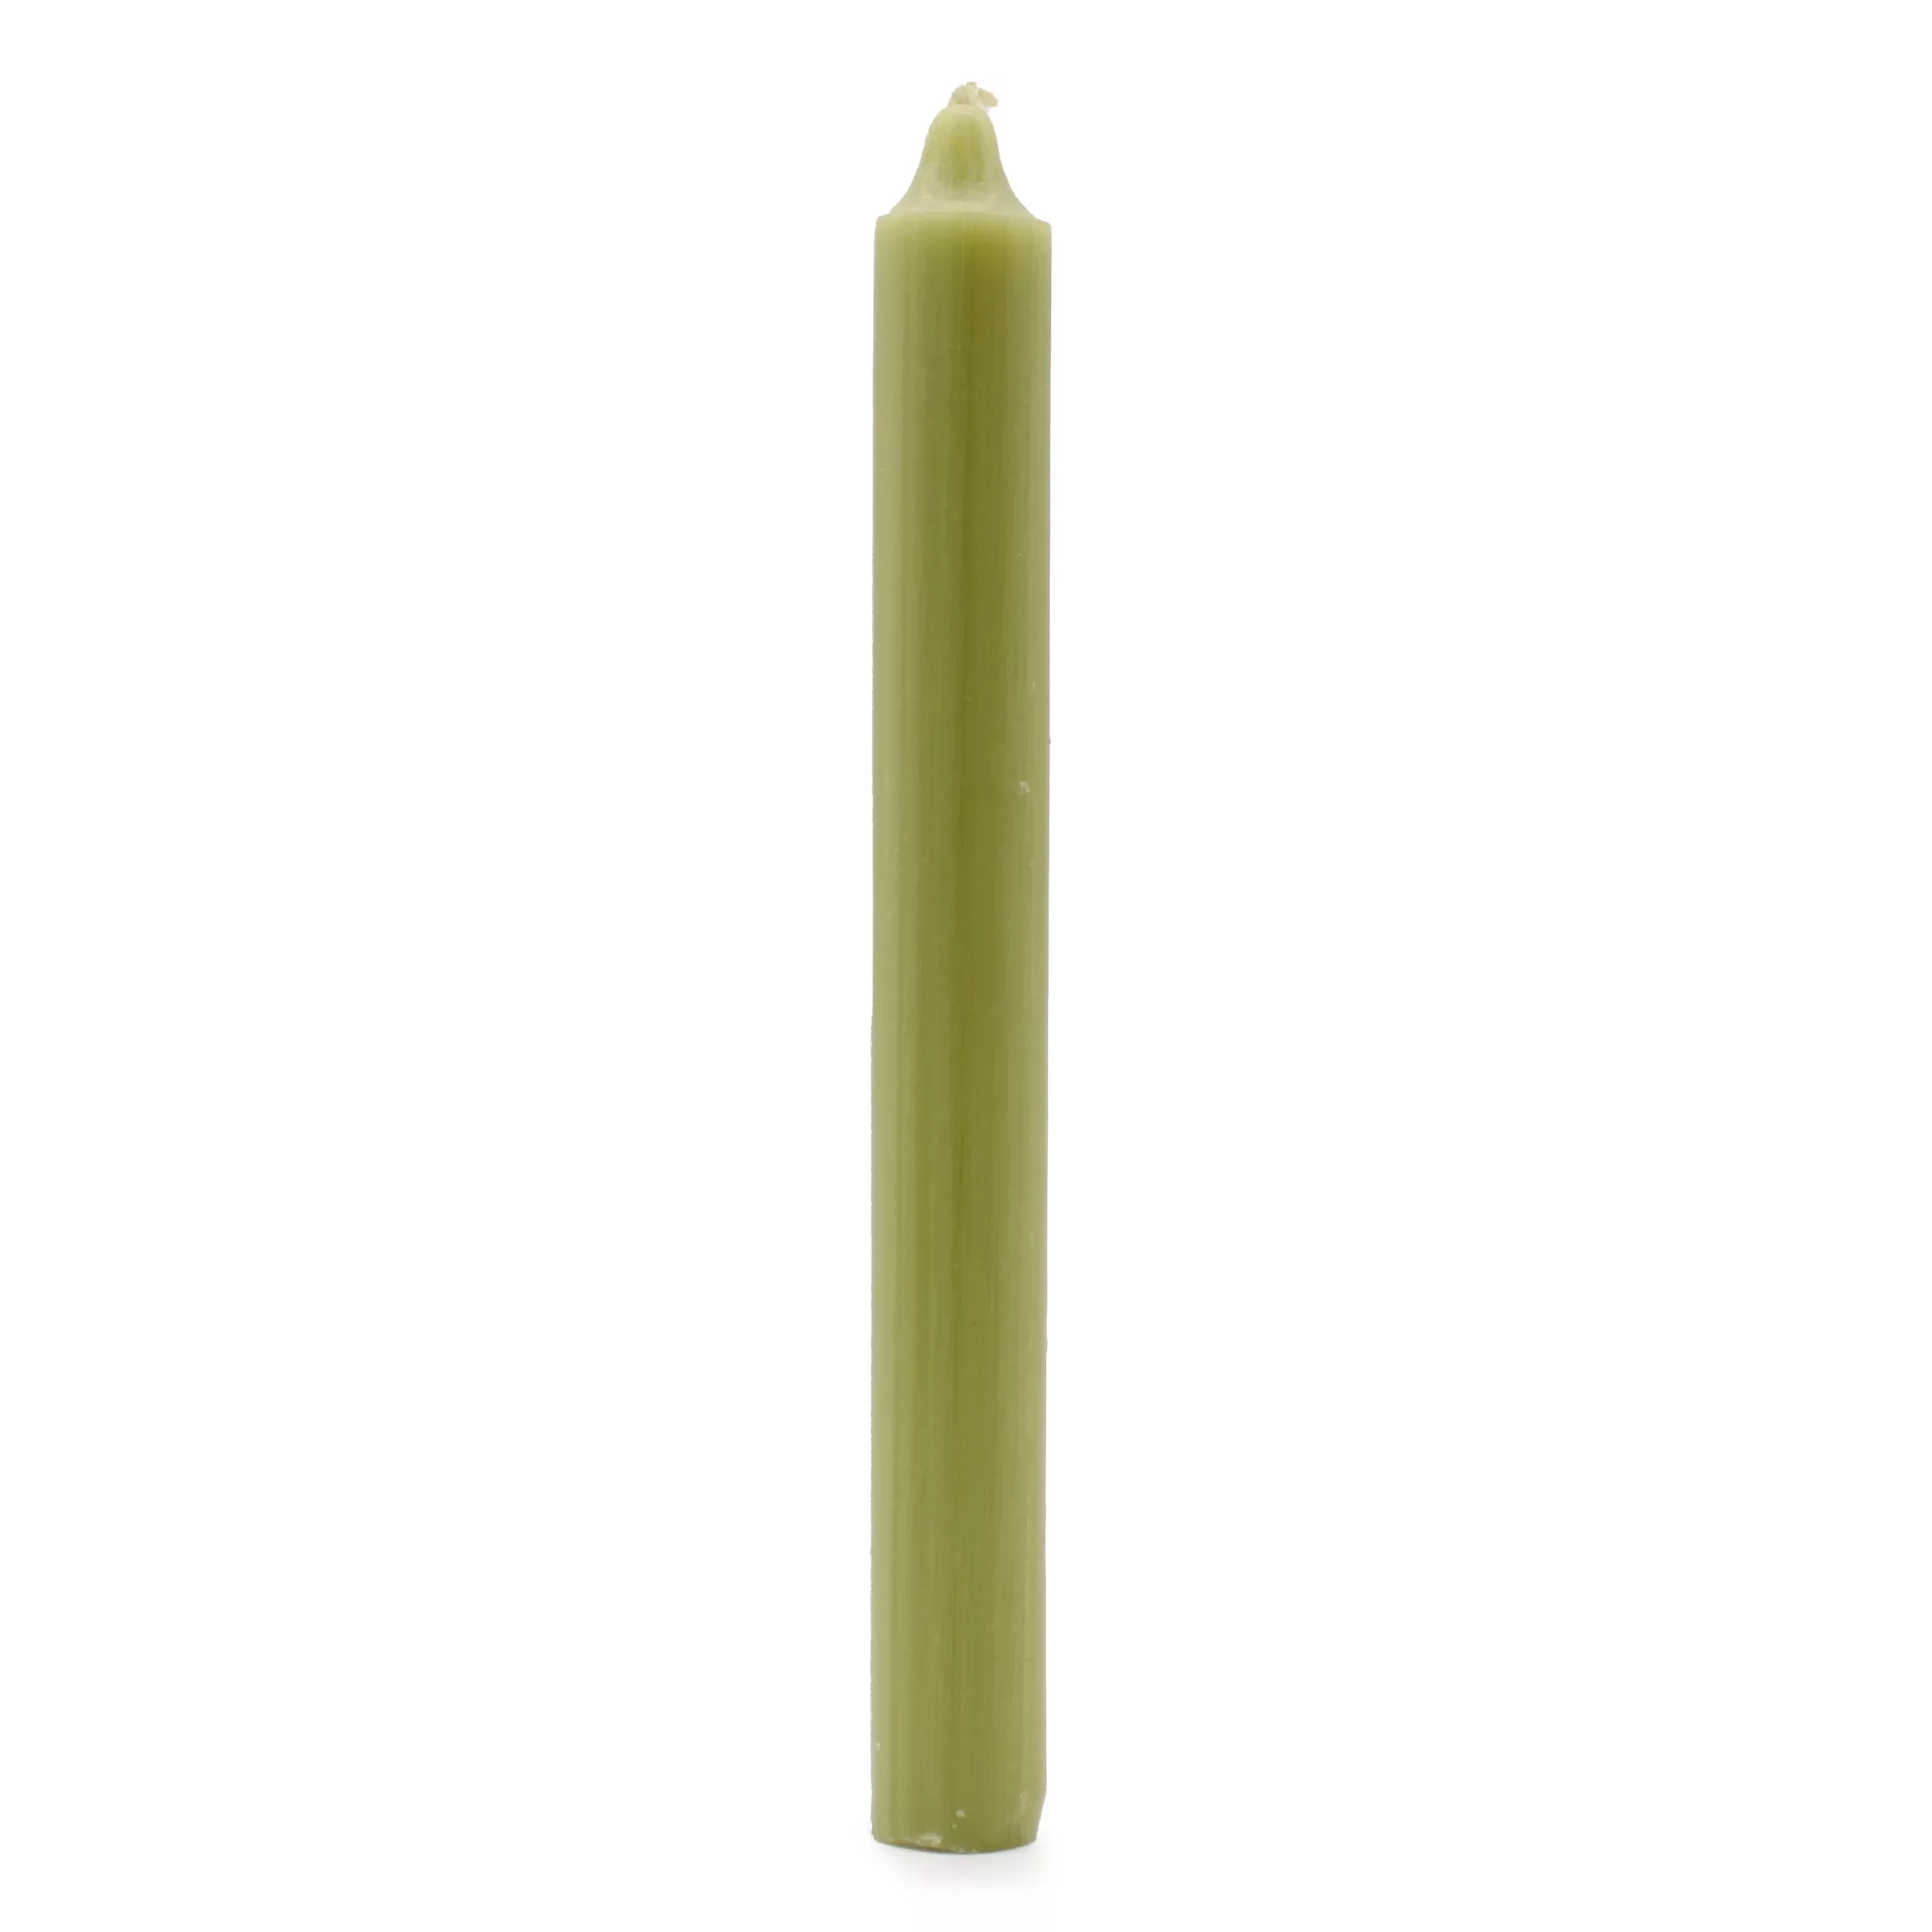 Solid Colour Dinner Candles – Rustic Olive – Pack of 5